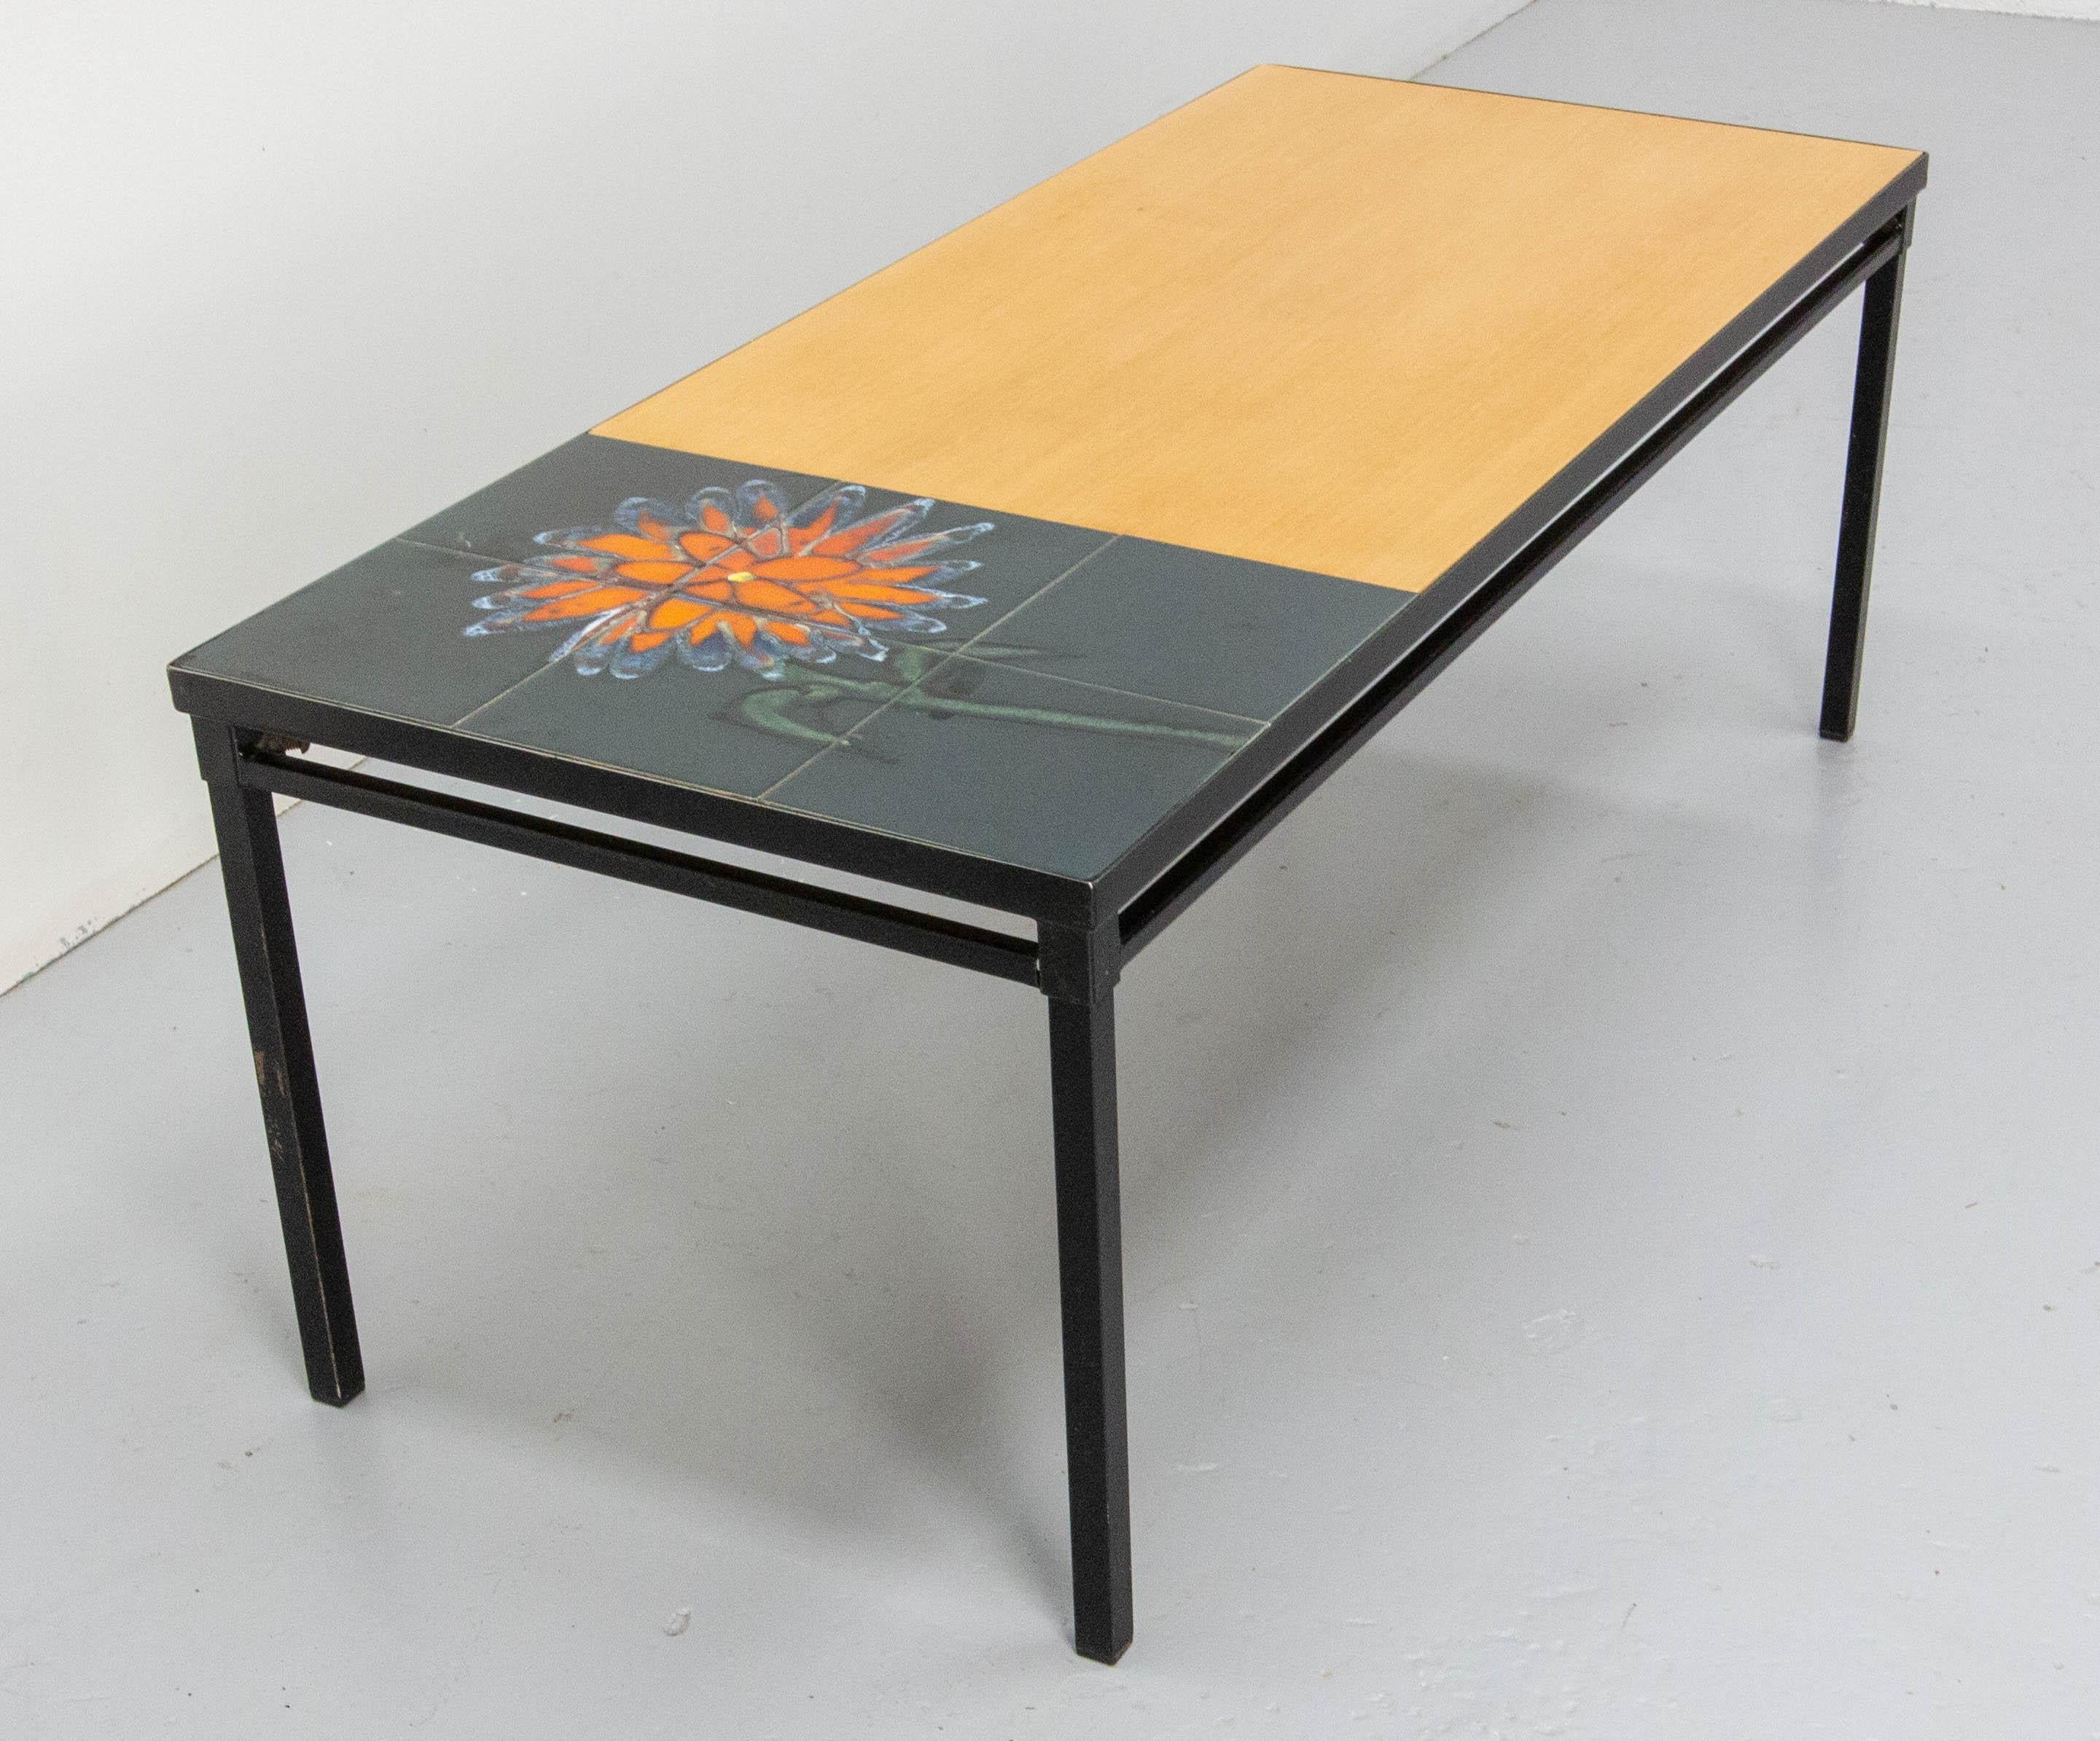 Coffee table with glazed faience from Vallauris and plated poplar
Iron base
French, mid-century
Ceramic and iron.

Good vintage condition with usual signs of use.
 
Shipping:
47 / 100 / 40.5 cm 11 Kg.
 